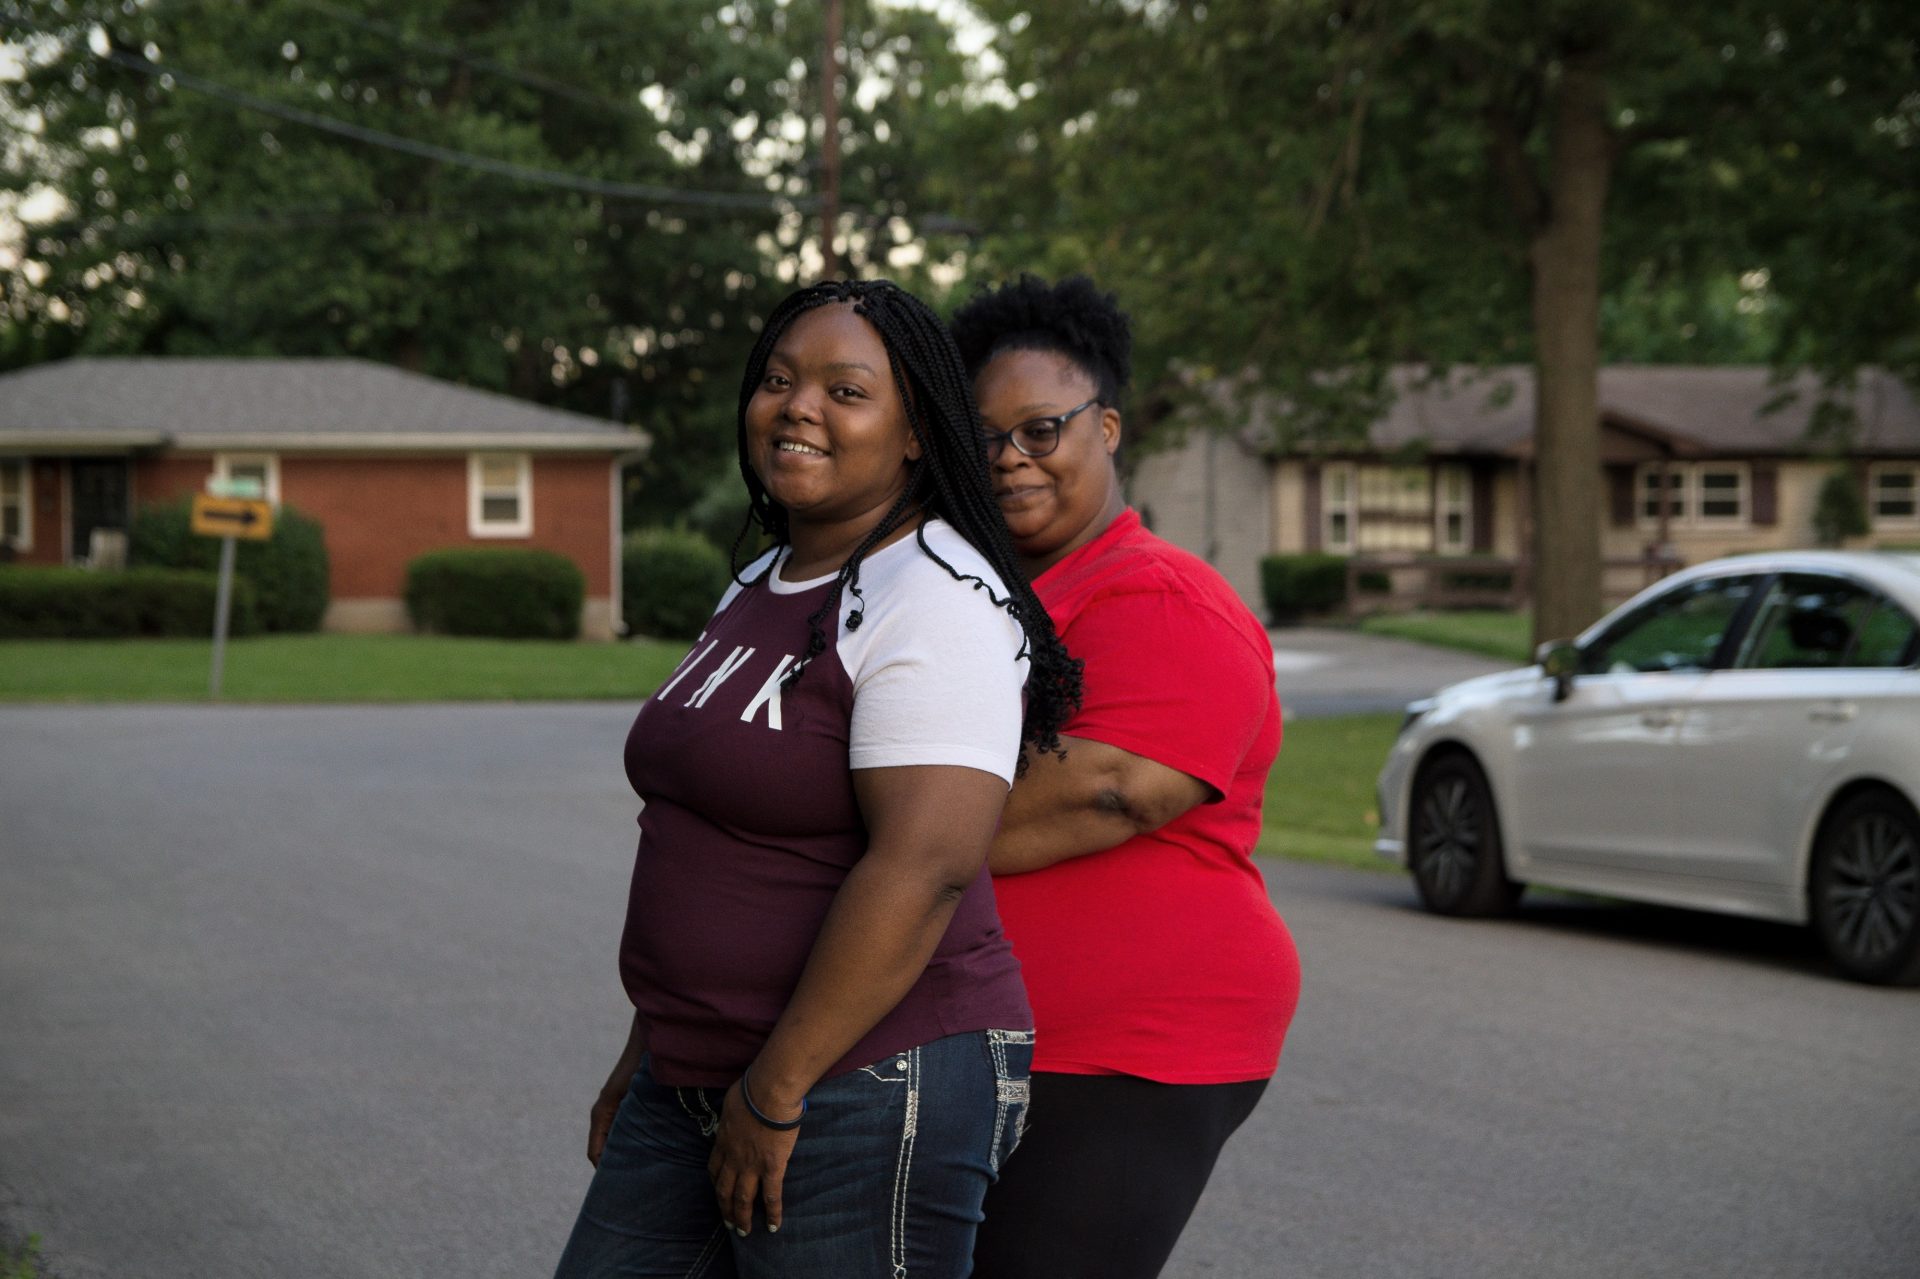 Bianca Austin (left) and Tahasha Holloway, both aunts to Taylor, stand outside Austin's home in Louisville, Ky. They're grateful that Taylor's name and story have become known nationwide. "But we don't want this at all," Austin said. "We want her back."